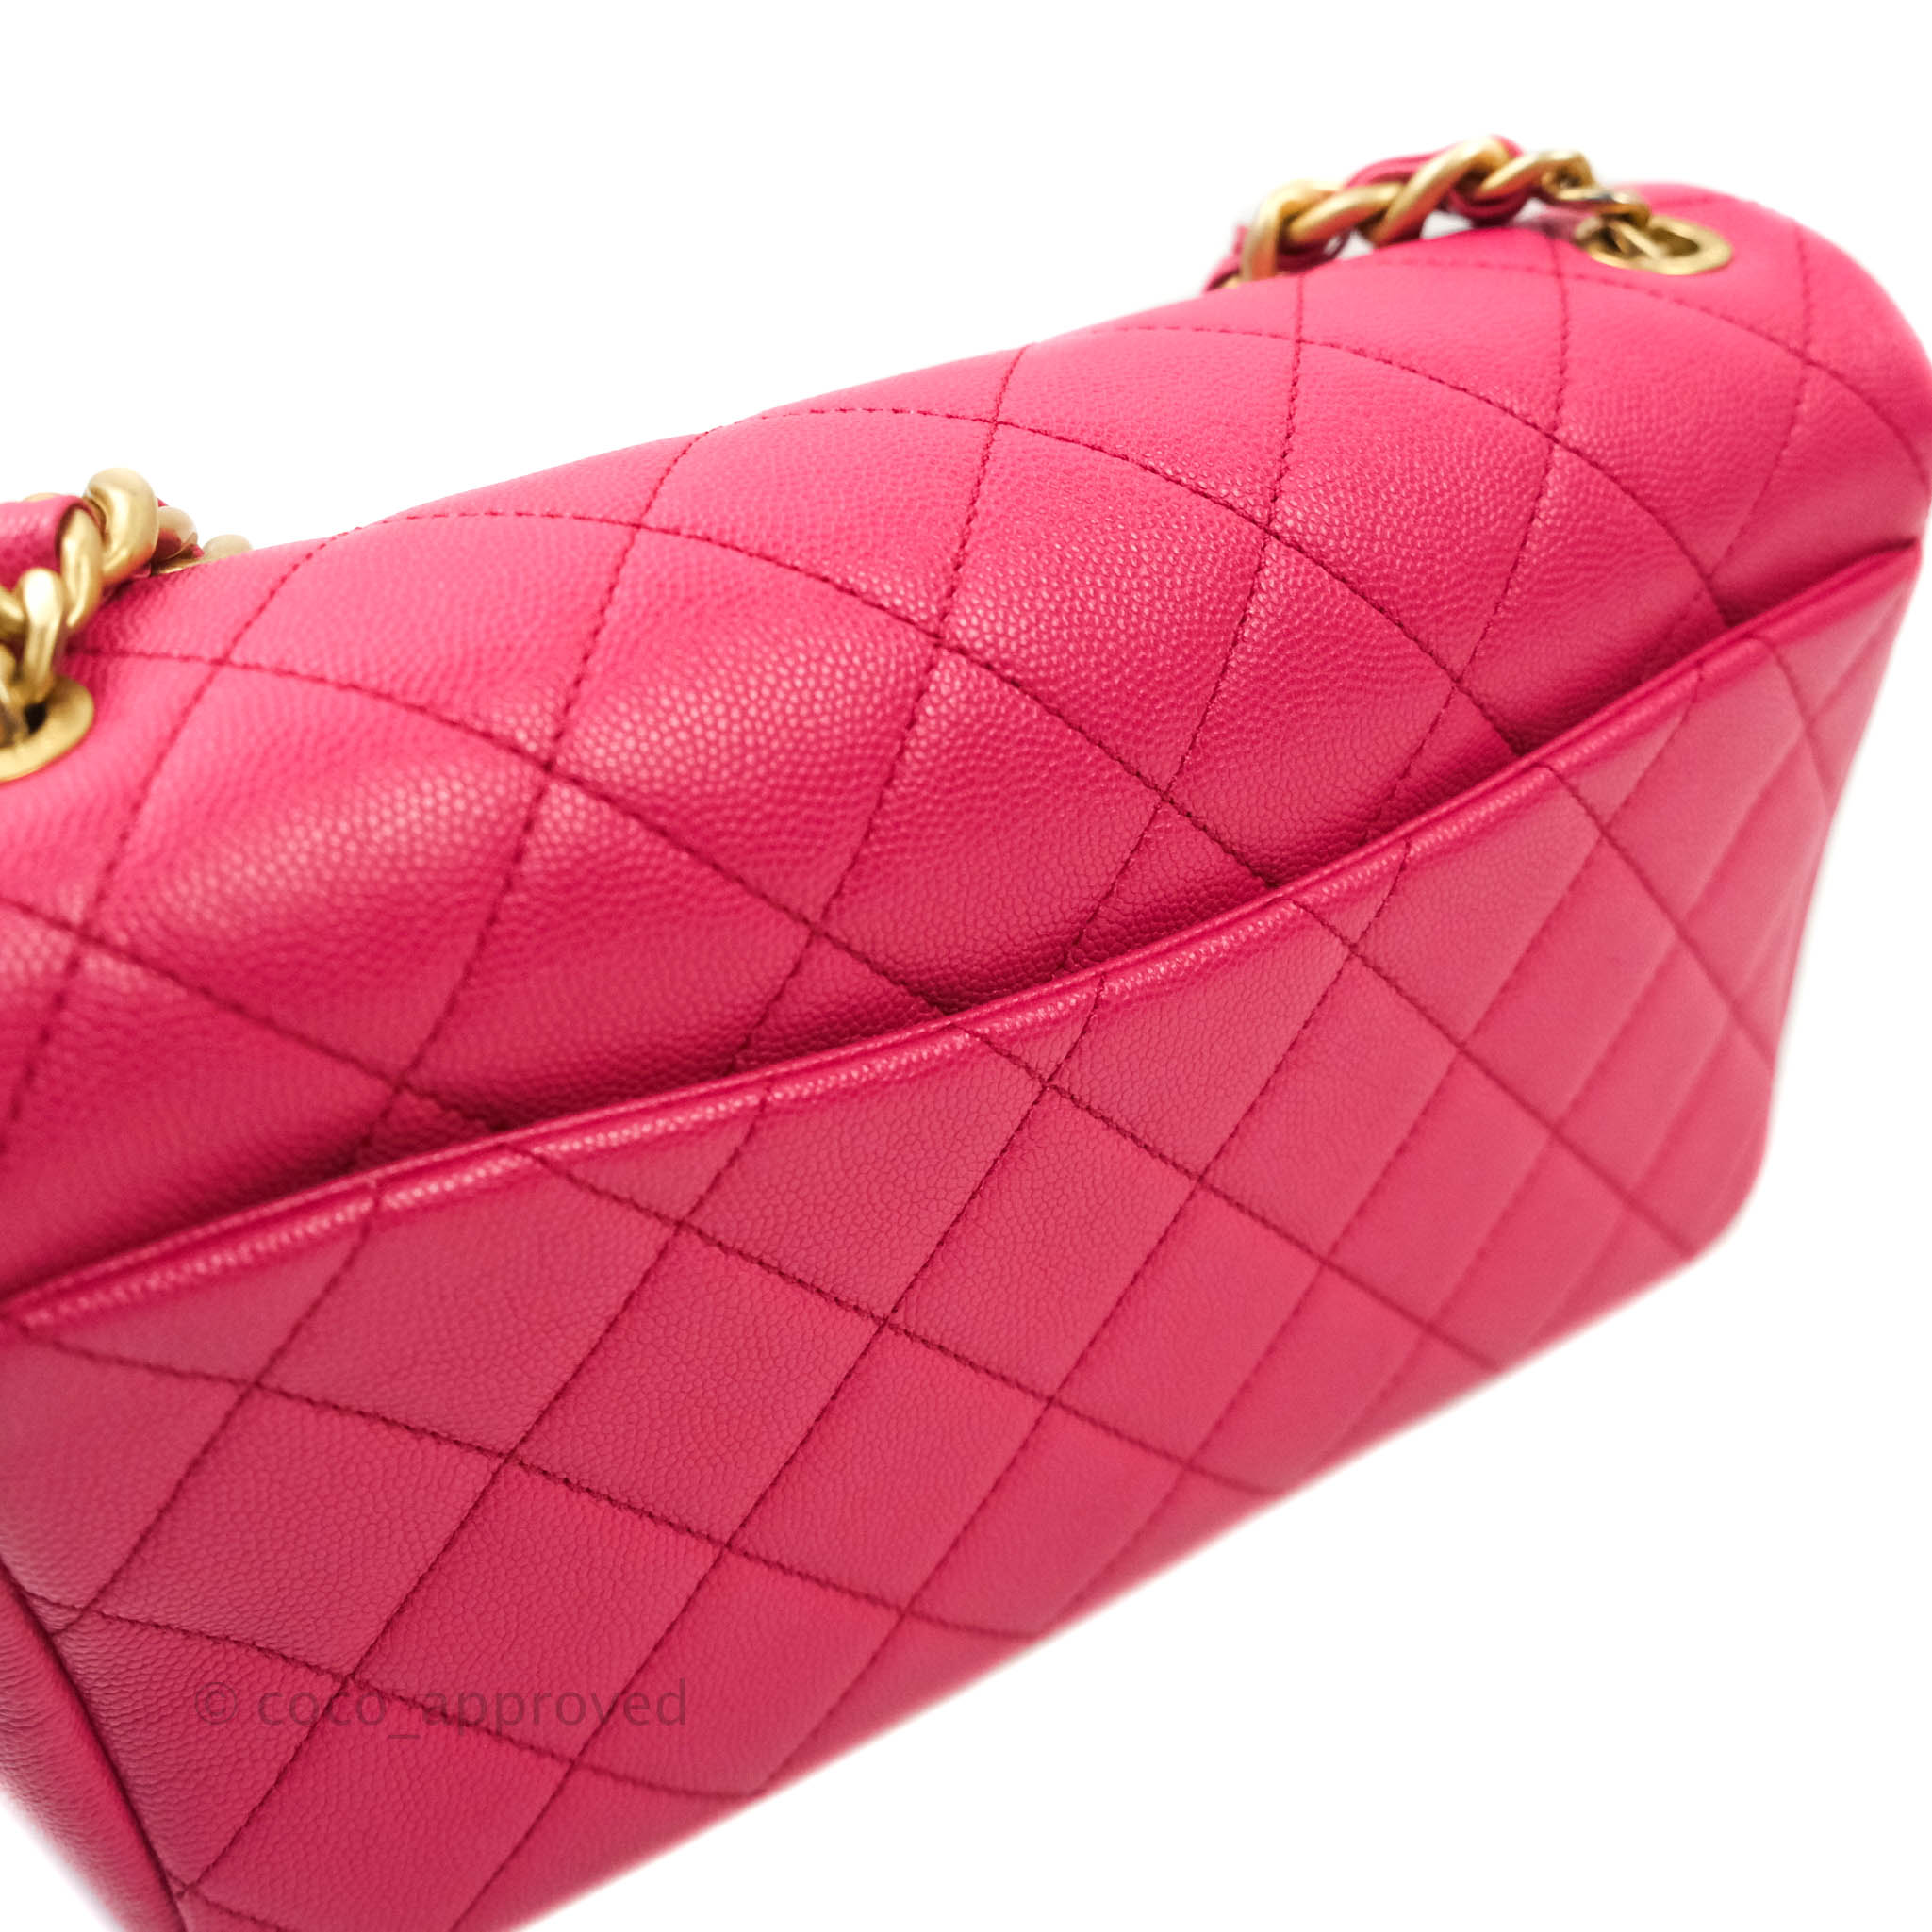 Chanel Fashion Therapy Shiny Lambskin Small Flap Bag in Dark Pink